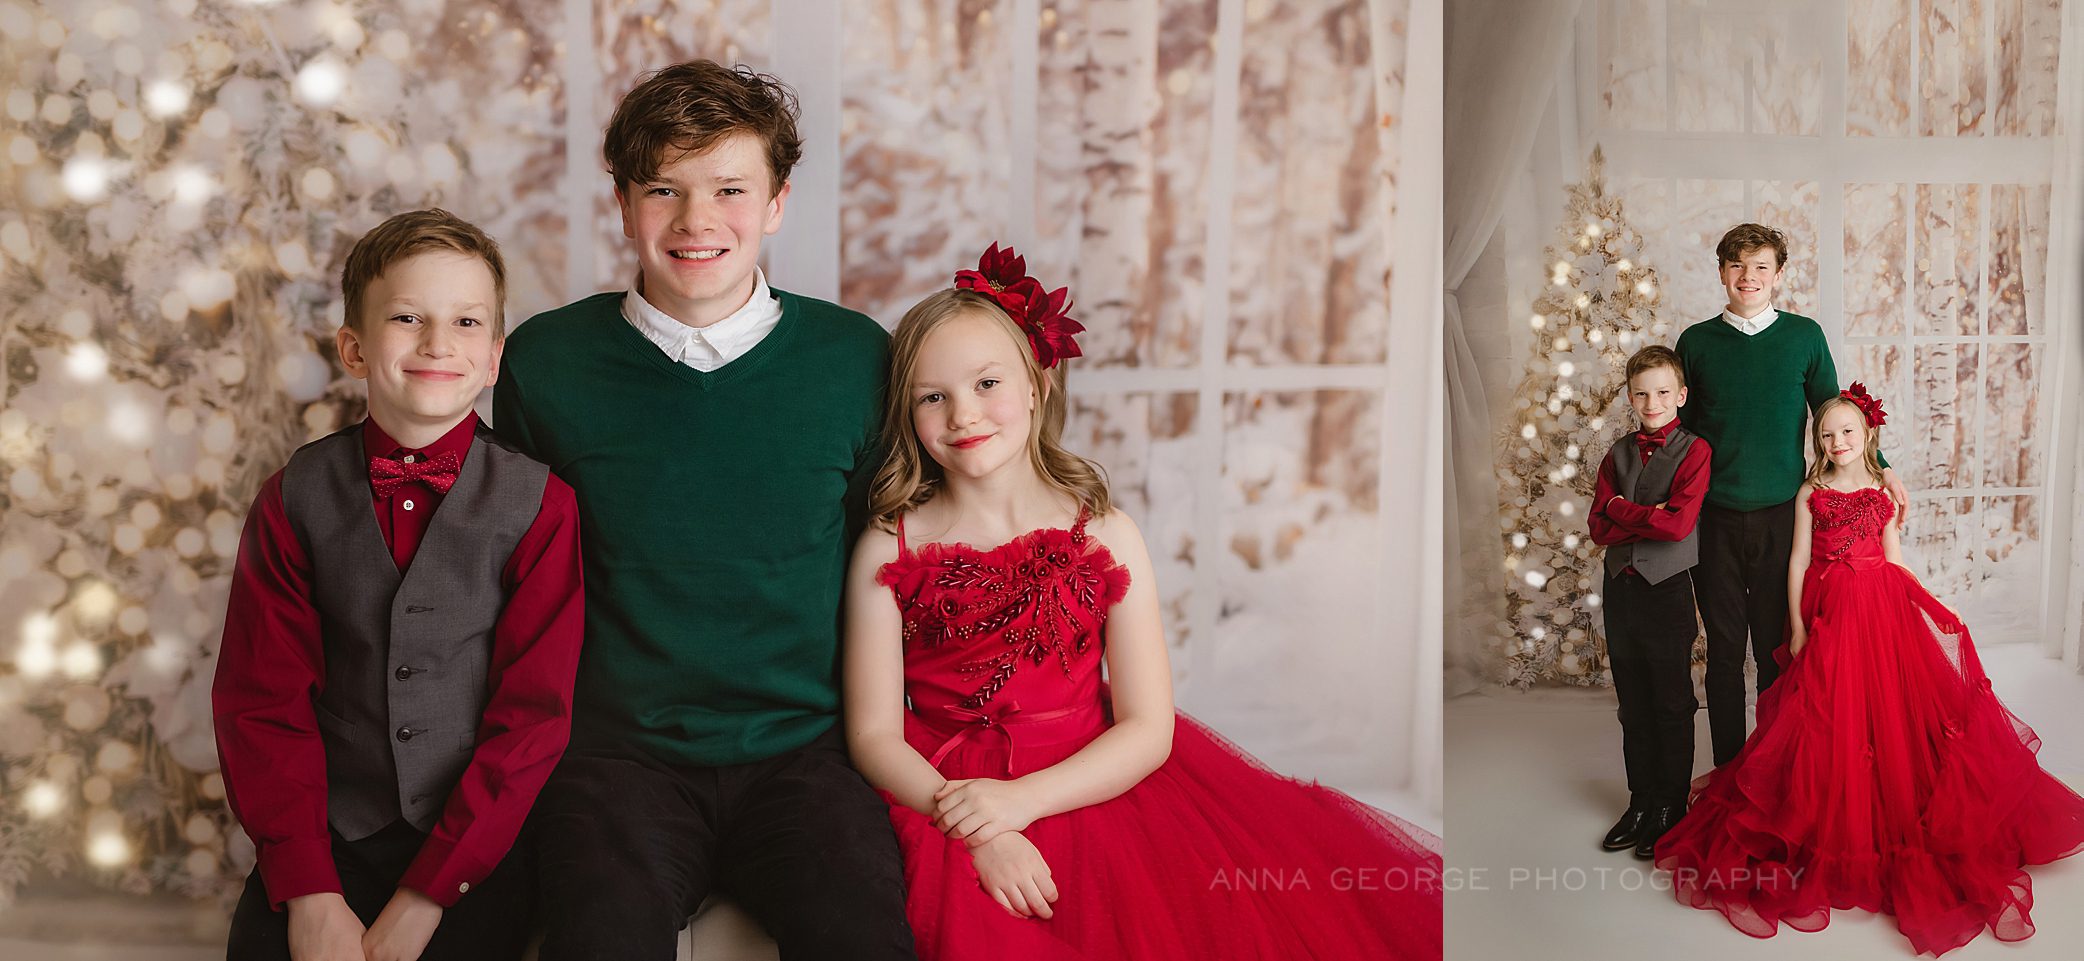 family christmas pictures in madison wi studio 3 kids posing together